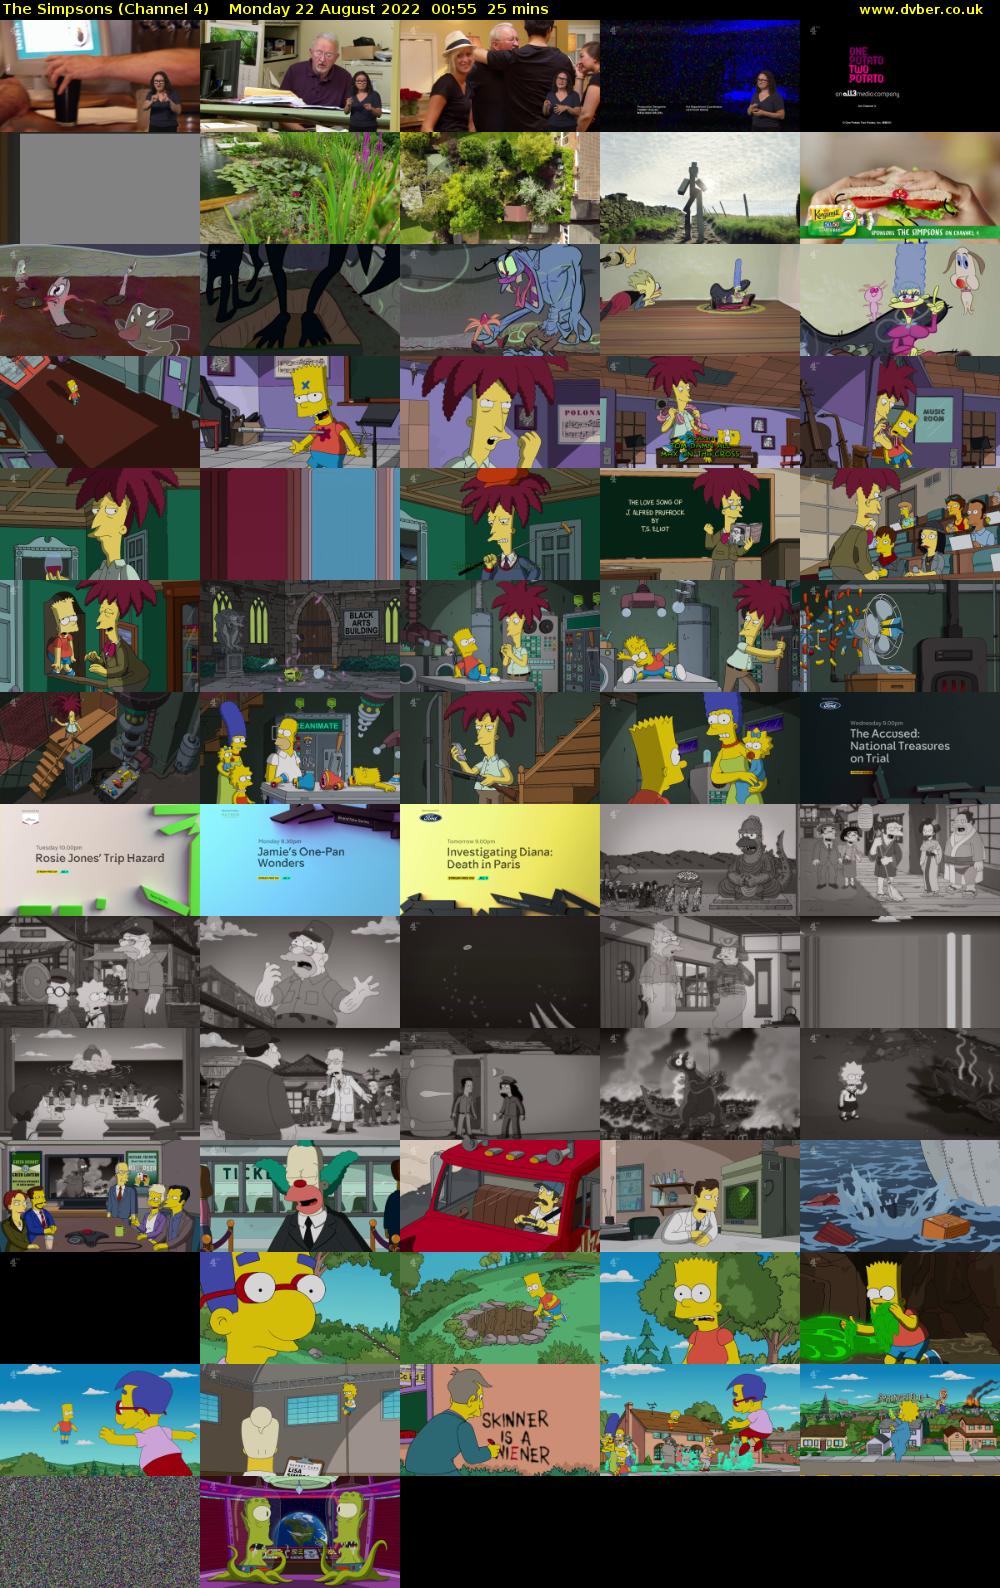 The Simpsons (Channel 4) Monday 22 August 2022 00:55 - 01:20